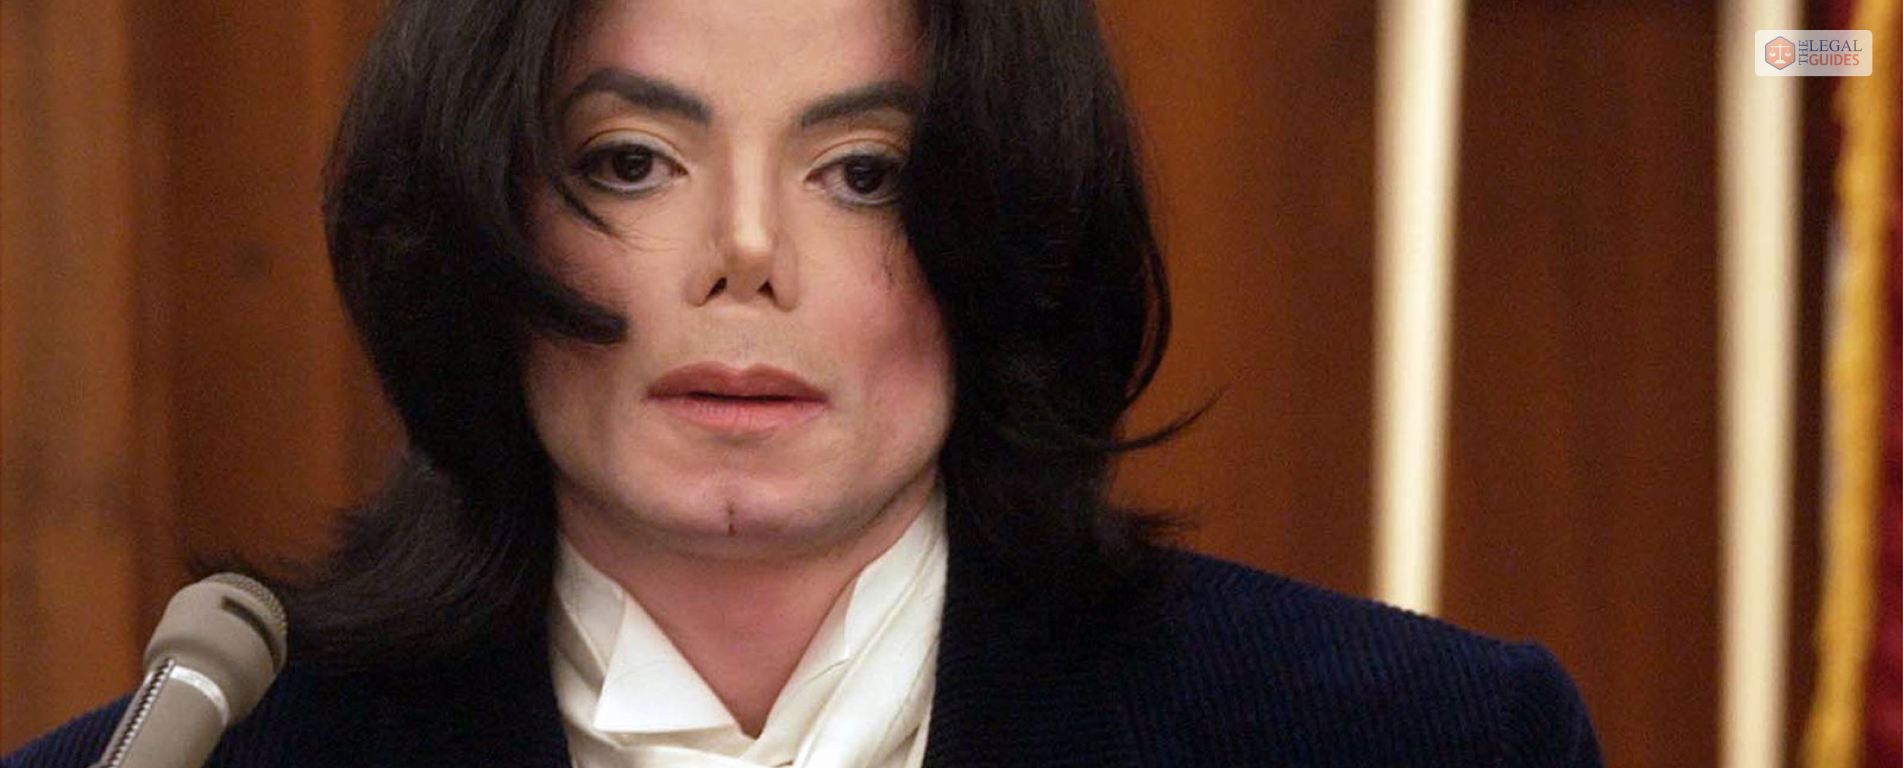 Late Michael Jackson Faces Accusations Of Abuse